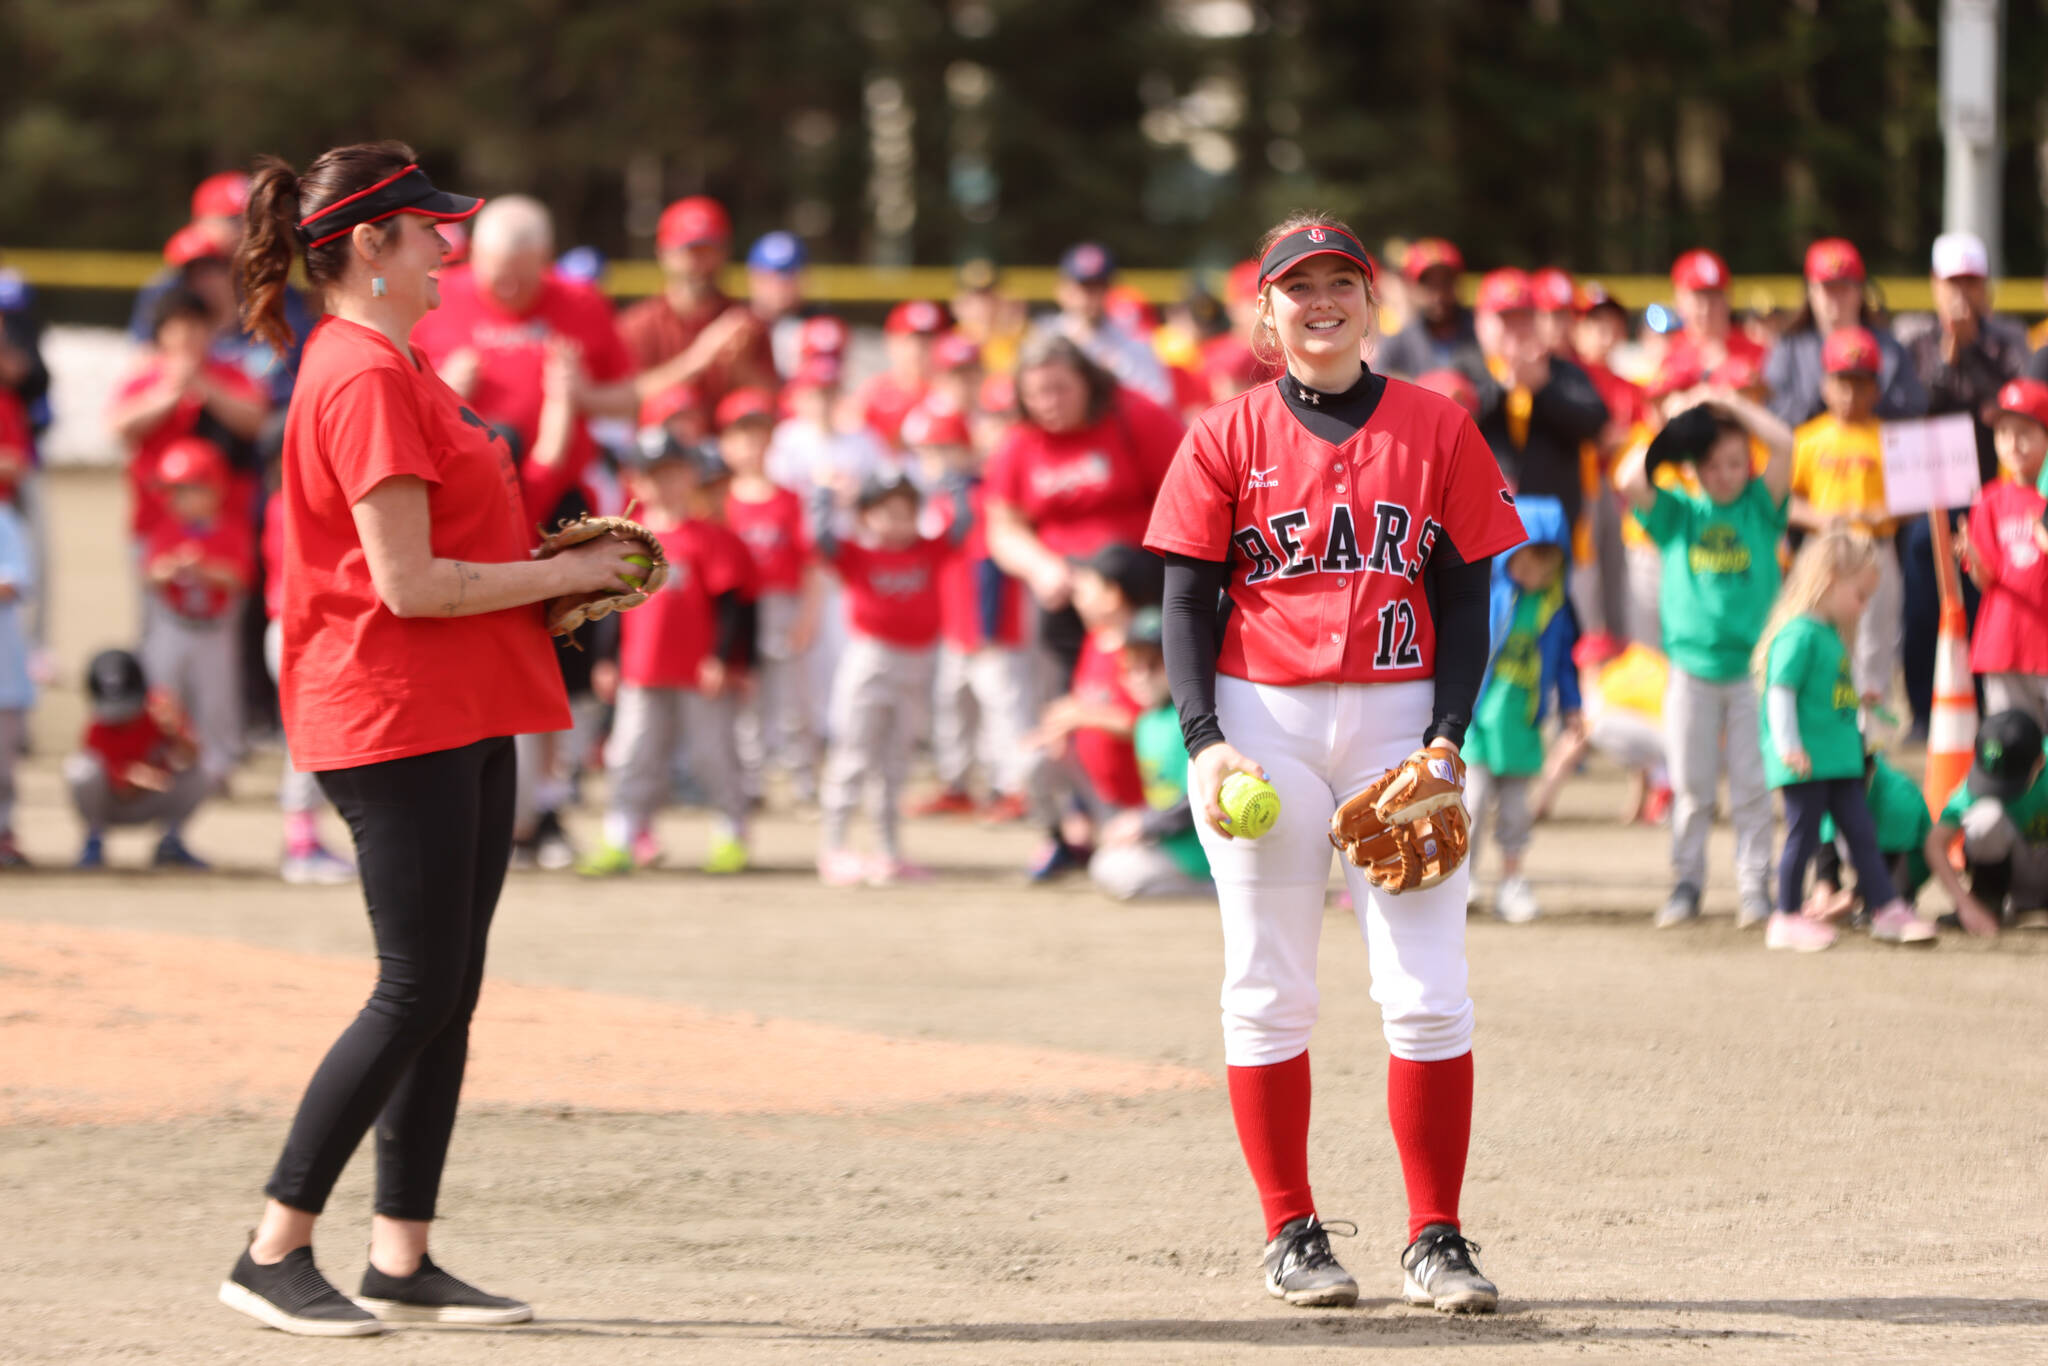  Ben Hohenstatt / Juneau Empire
Mandy Massey smiles at her daughter, Gloria Bixby, before the two threw simultaneous ceremonial first pitches Saturday at Adair-Kennedy Memorial Park. Massey and Bixby have a direct line to the inception of Gastineau Channel Little League softball as Massey’s father, David, was integral in the formation of the program.